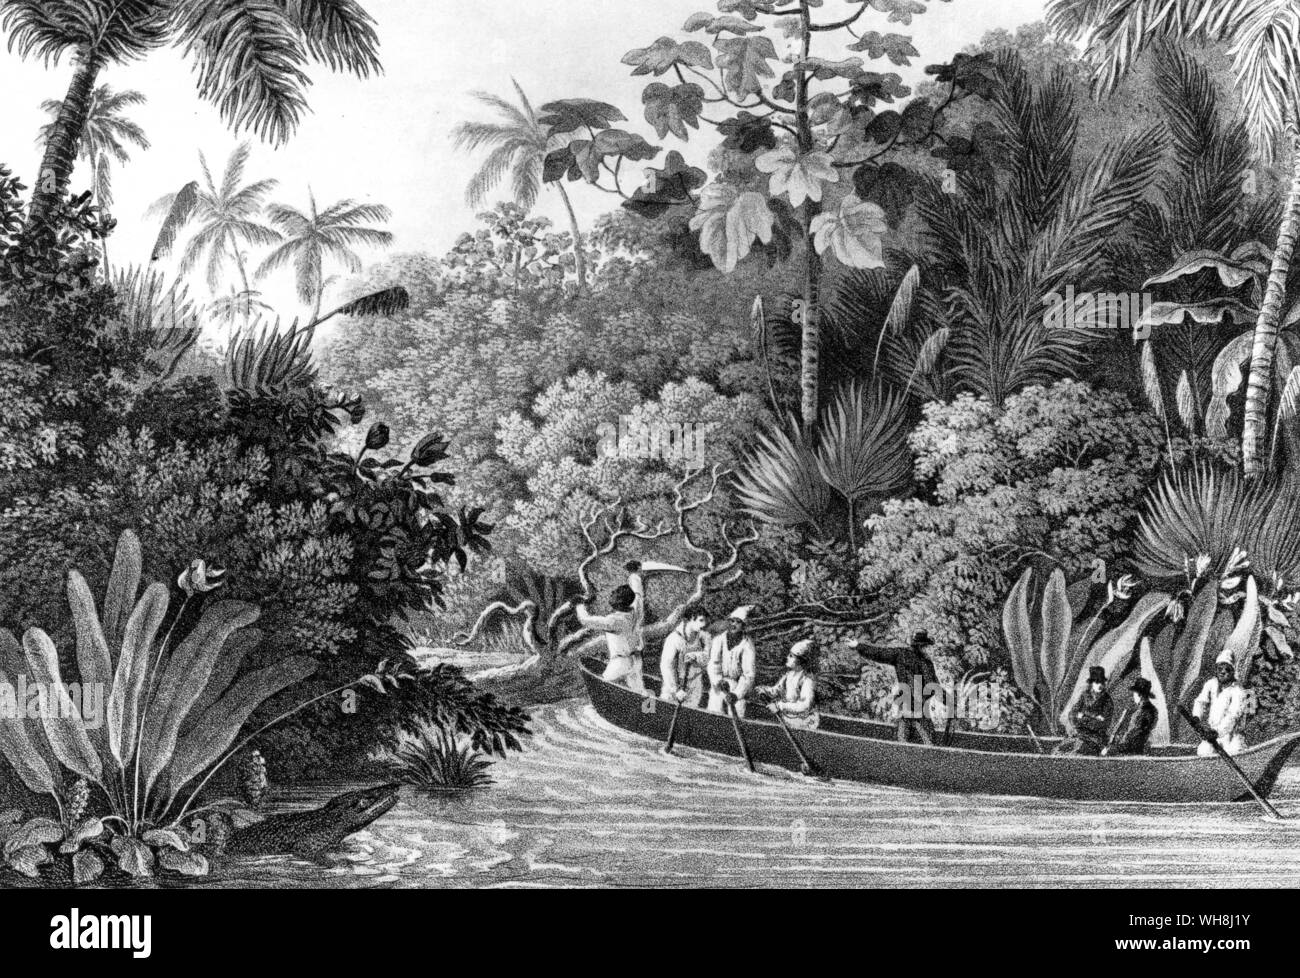 'The contrast of the palm trees growing amidst the common branching kinds, never fails to give the scene an inter-tropical character.' (quote) Darwin and the Beagle by Alan Moorhead, page 56. Stock Photo